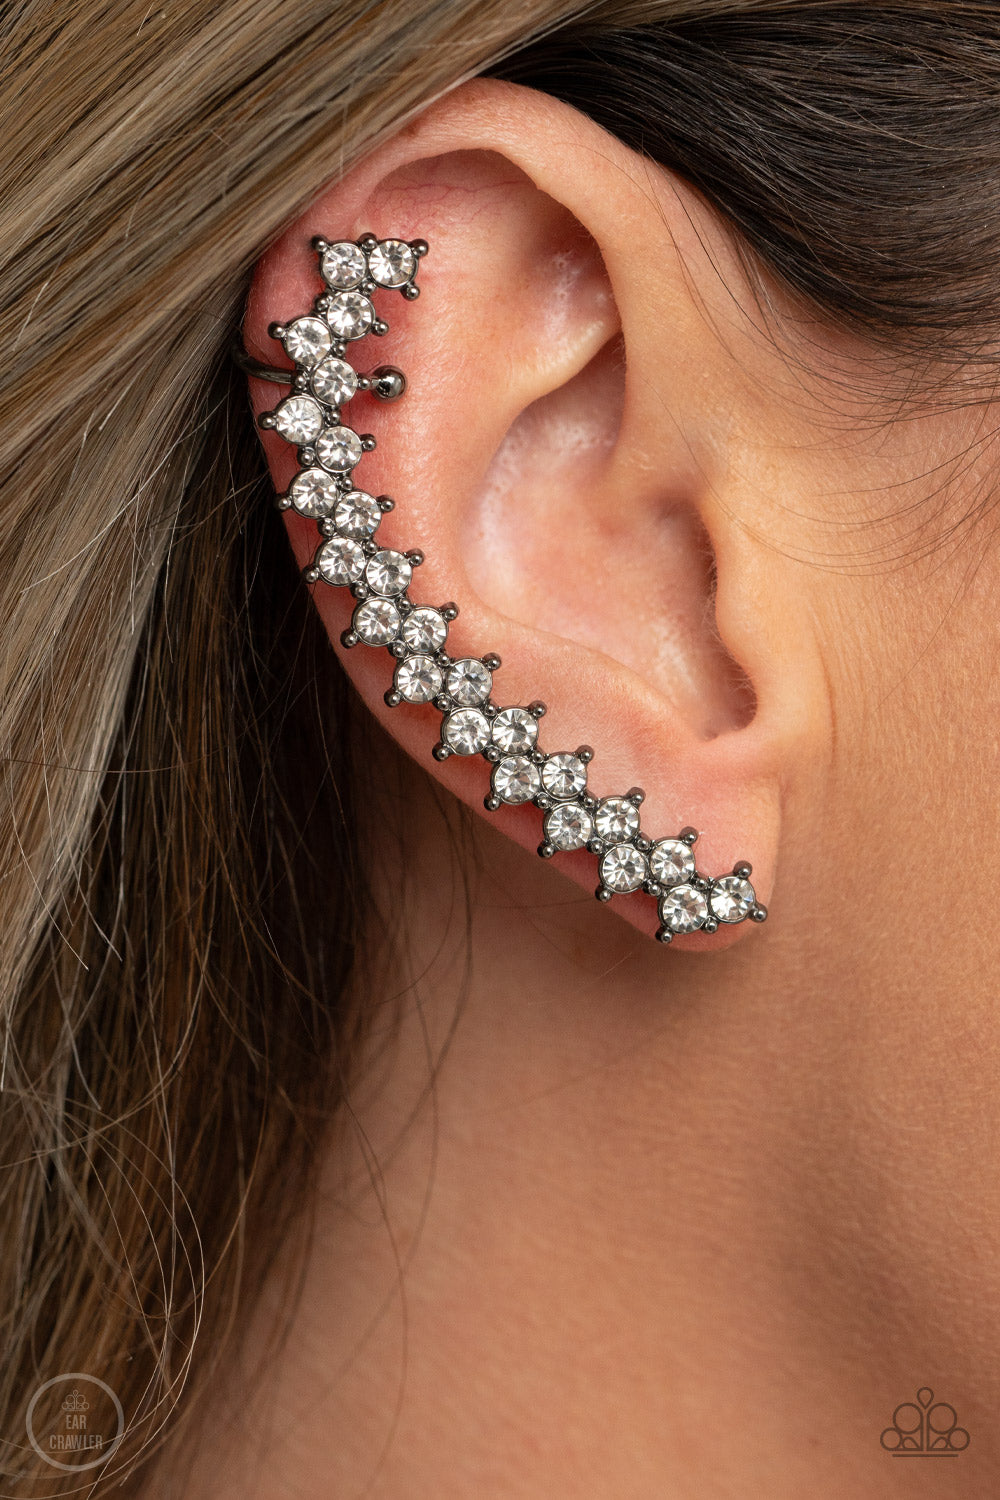 Let There Be LIGHTNING - Black Rhinestone Ear Crawlers encased in studded gunmetal fittings, pairs of glassy white rhinestones stack into a zigzagging frame up the ear for an electrifying fashion. Features a dainty cuff attached to the top for a secure fit.  Sold as one pair of ear crawlers.  Paparazzi Jewelry is lead and nickel free so it's perfect for sensitive skin too!